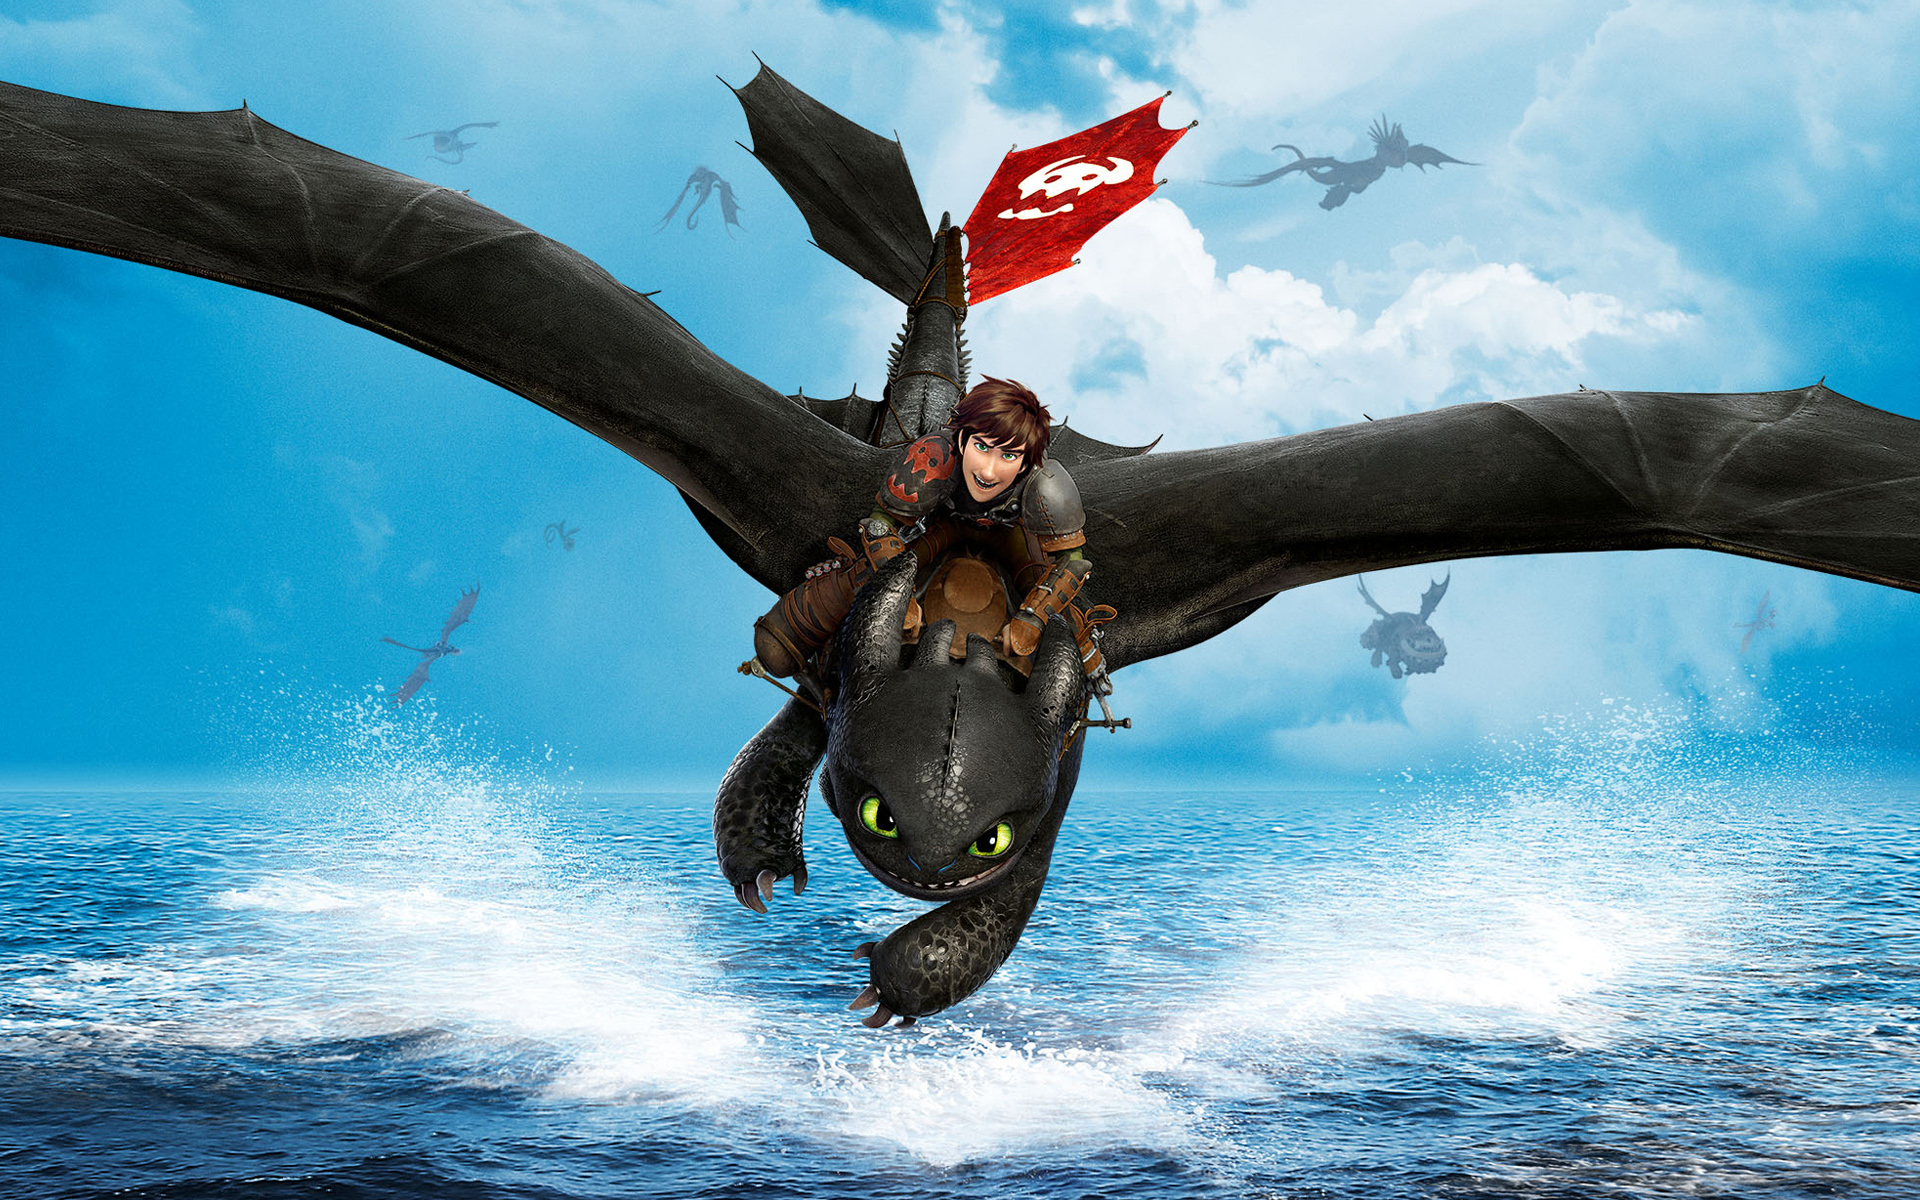 Hiccup How To Train Your Dragon How To Train Your Dragon 2 Toothless How To Train Your Dragon 1920x1200